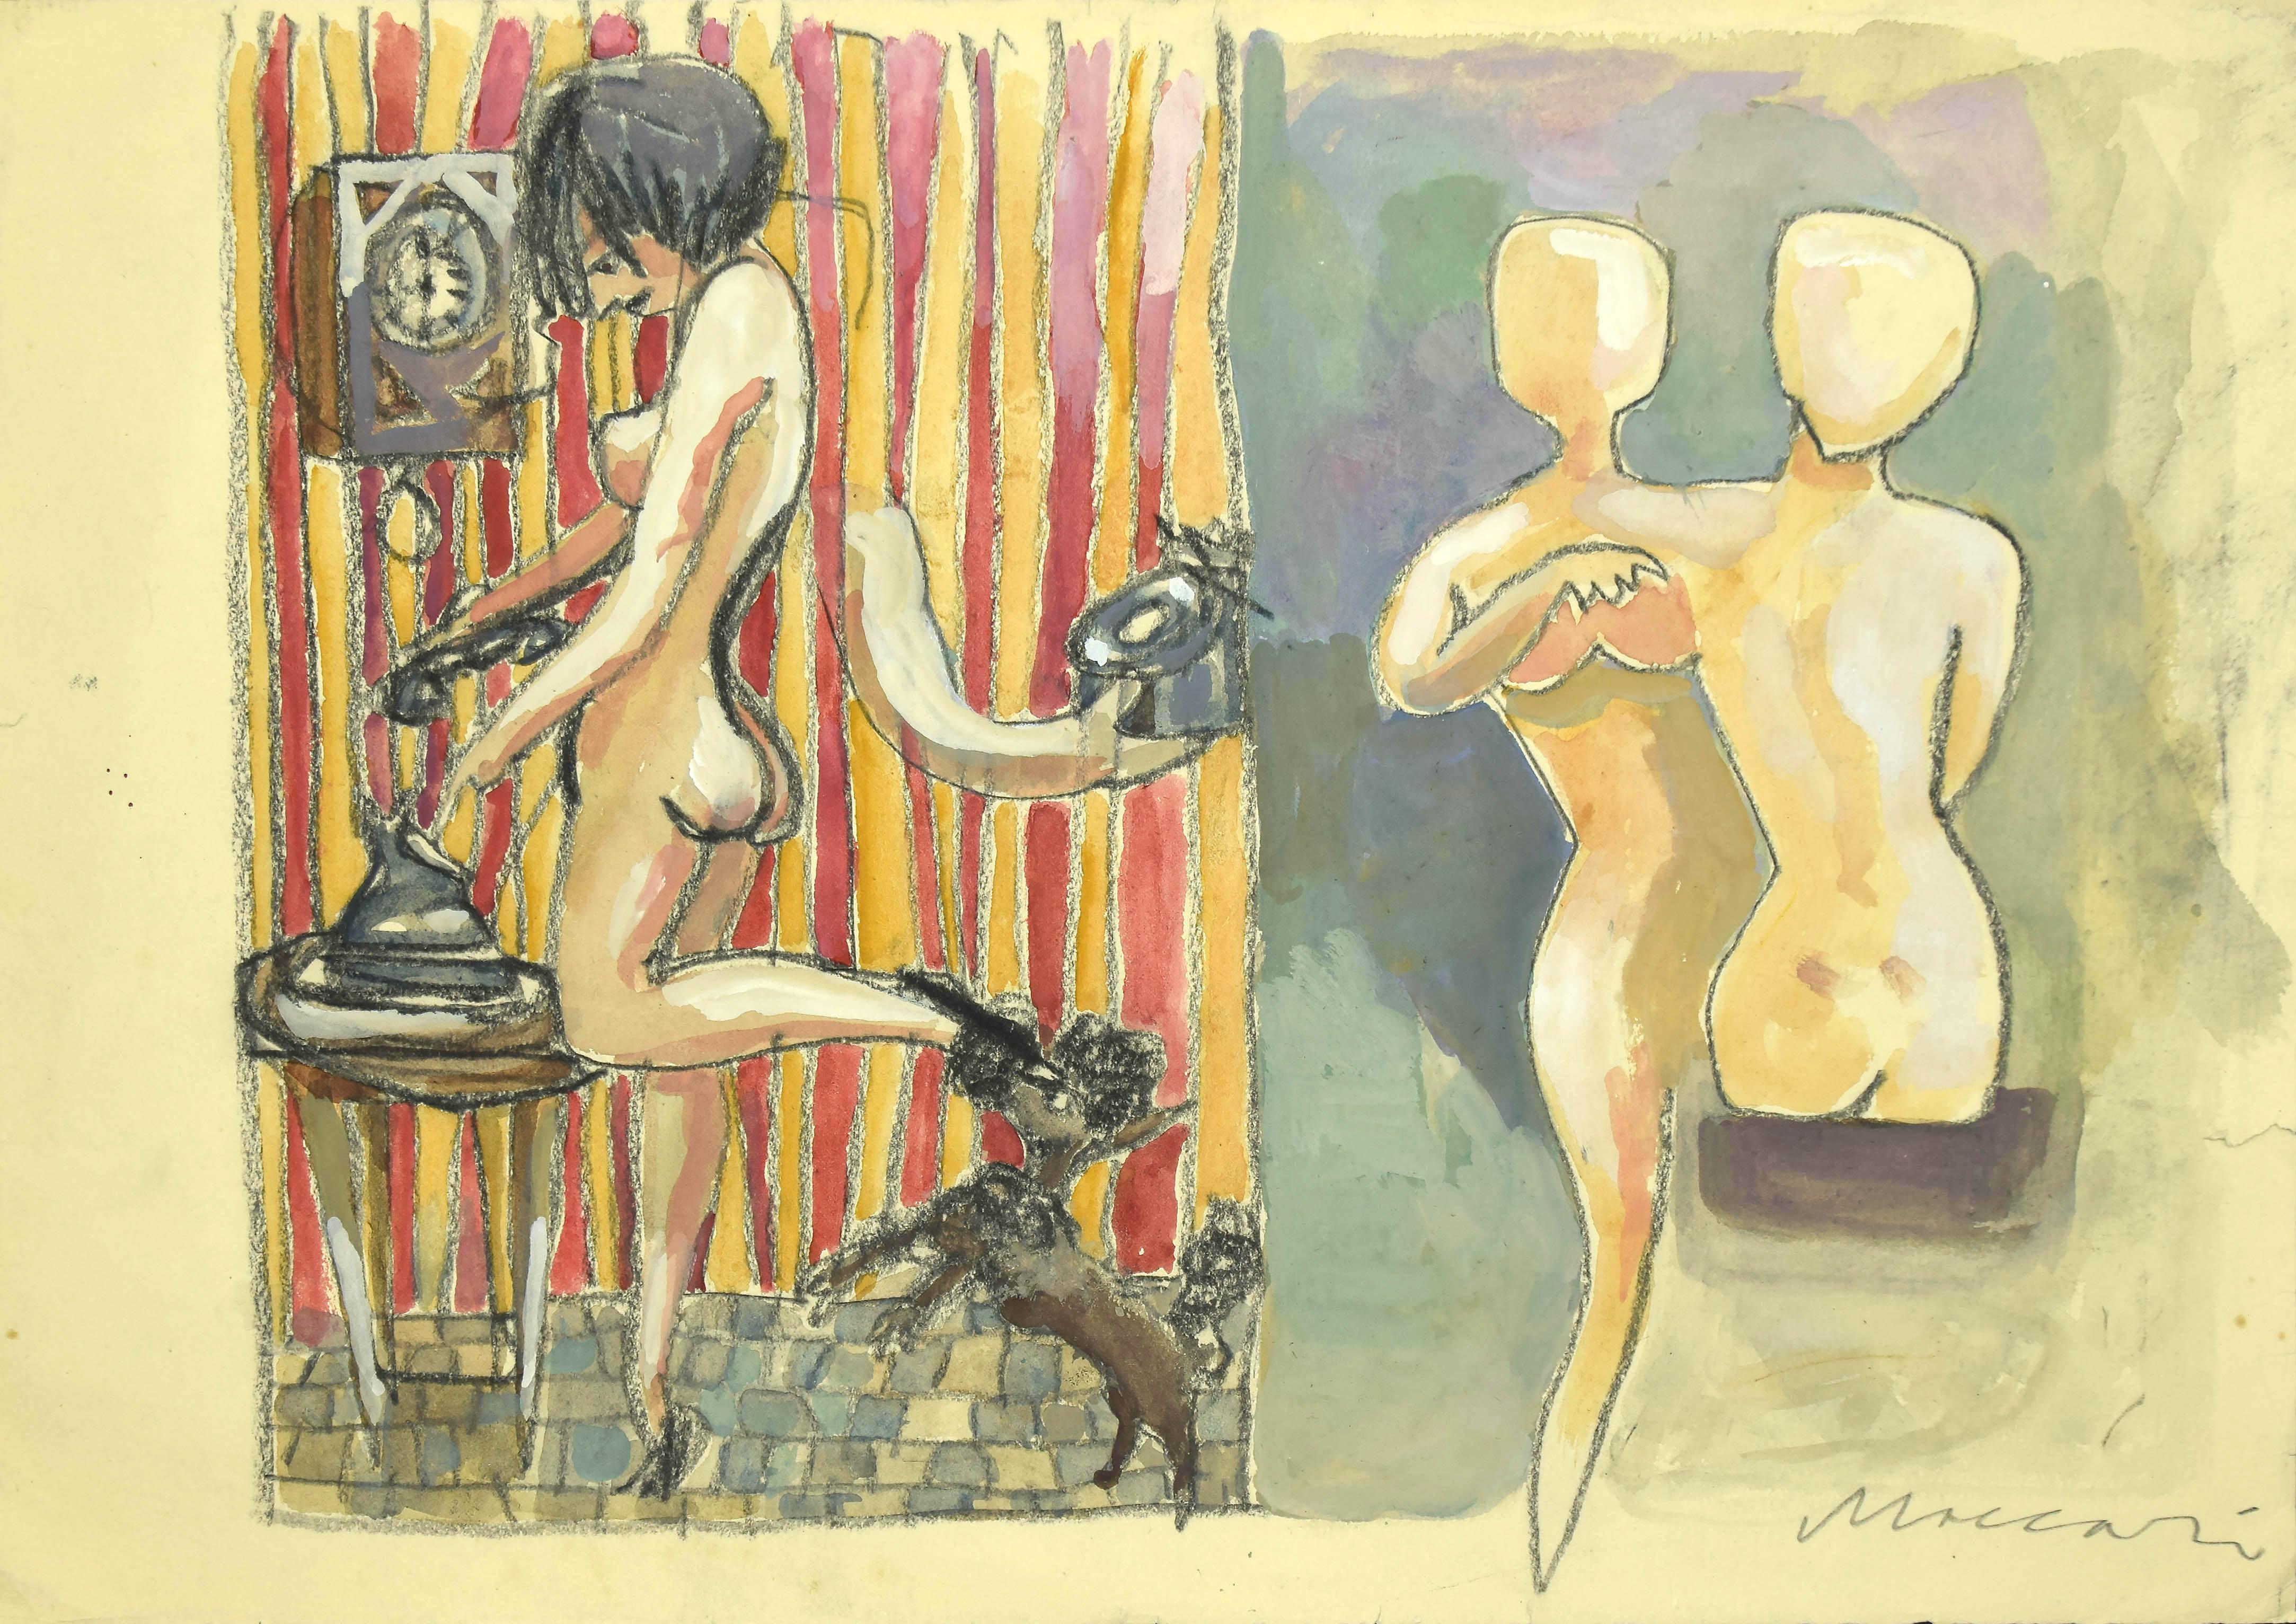 "The Phone Rings"  is an original hand colored drawing on ivory-colorated paper by Mino Maccari (1898-1989).
In excellent conditions: As good as new.

Sheet dimension: 35 x 50 cm.

This is an original drawing representing a nude woman who goes to